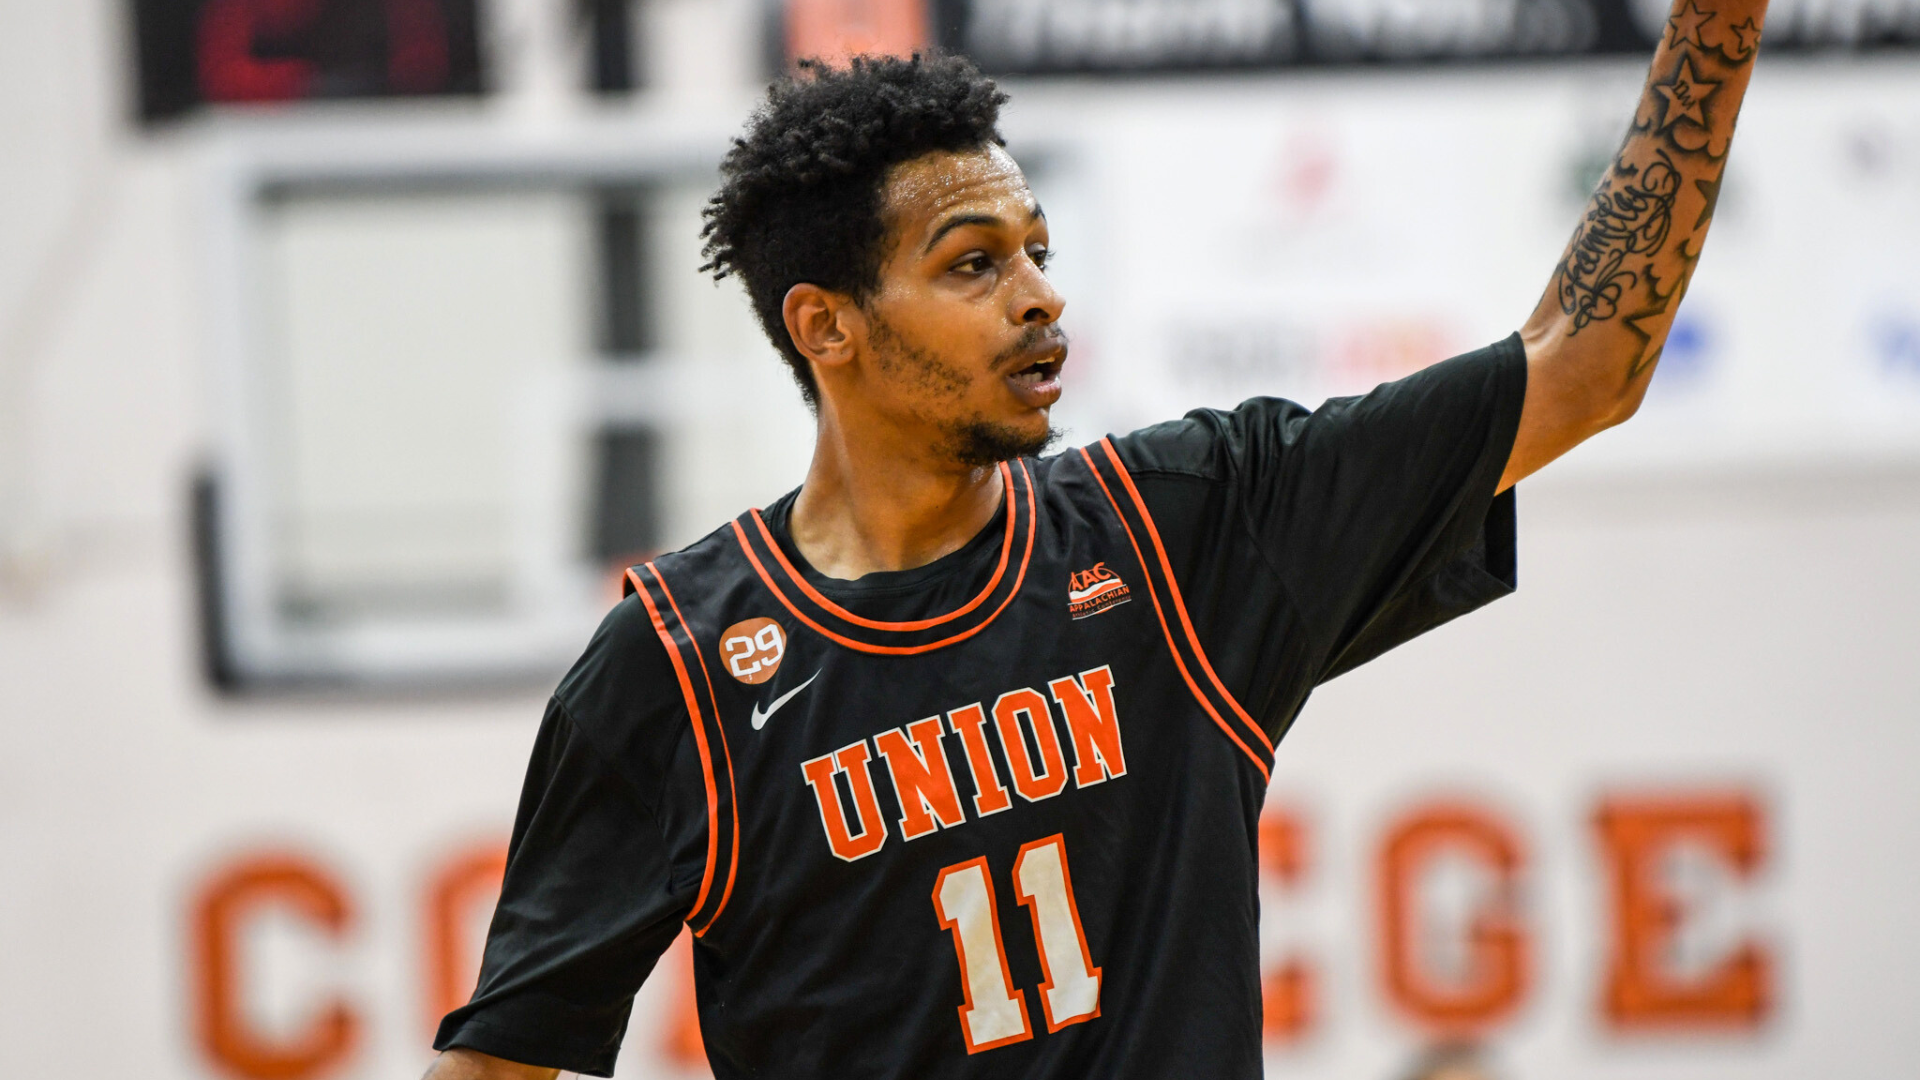 Union overcomes double-digit deficit to defeat Bryan